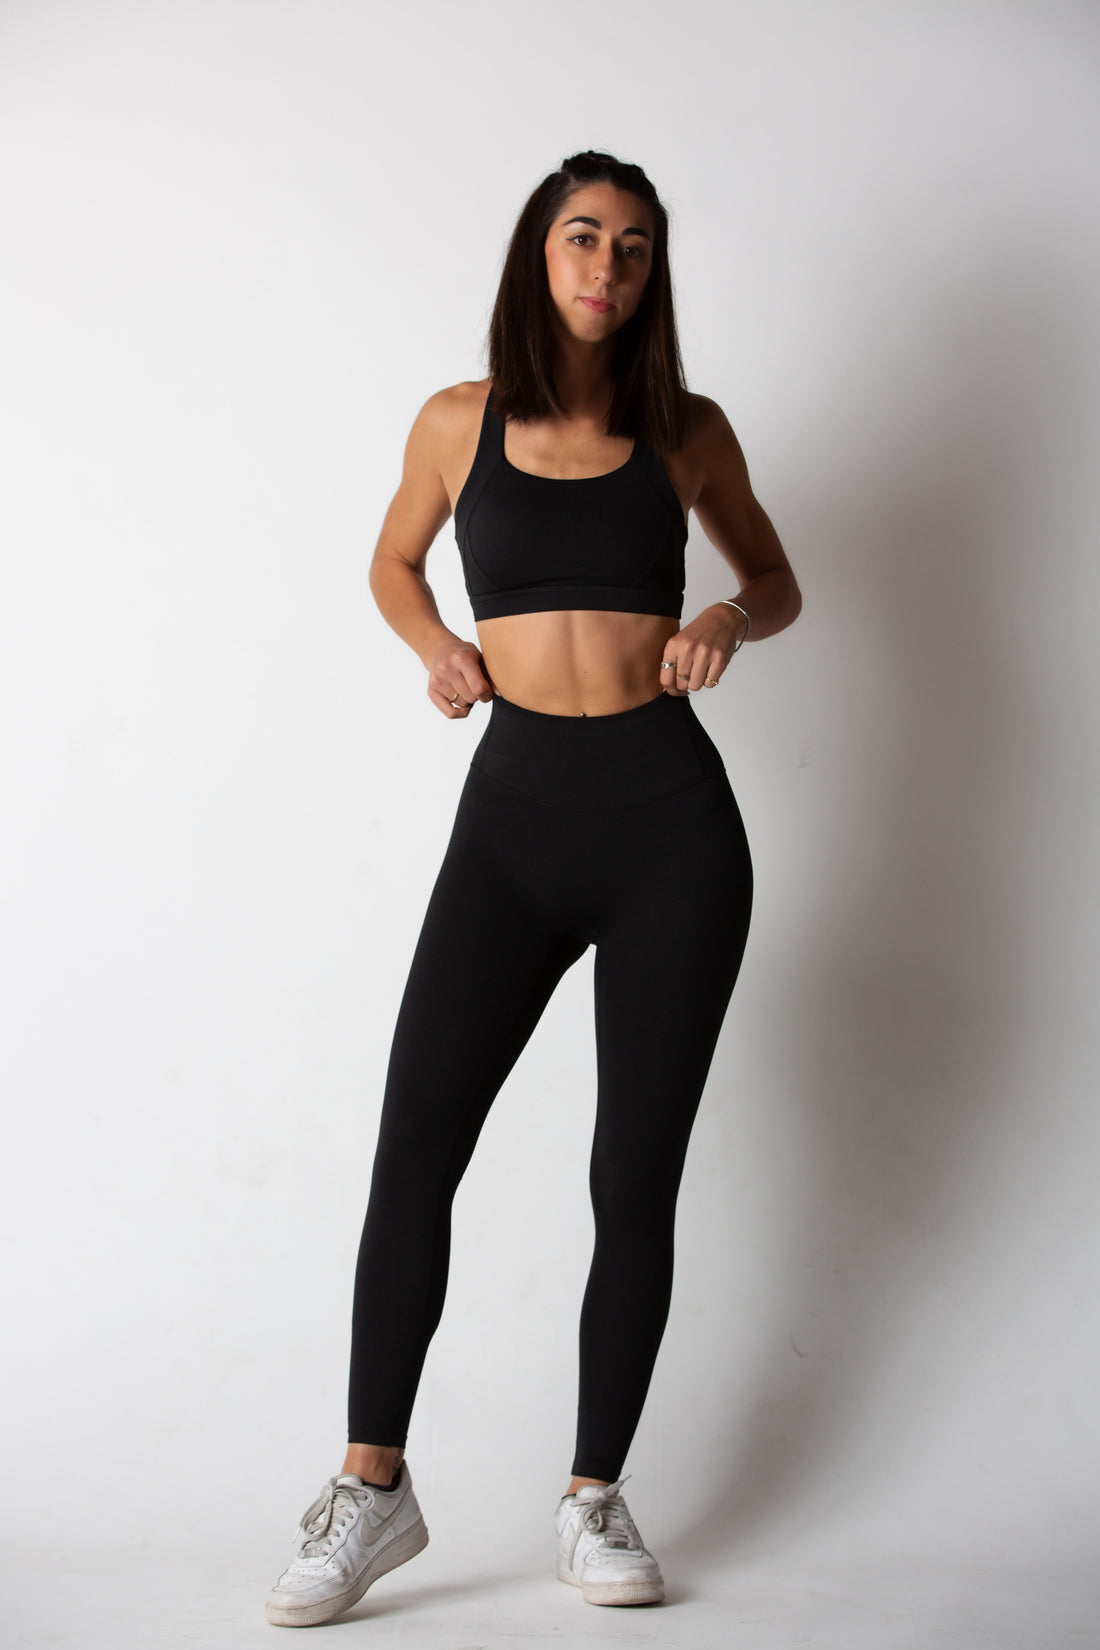 CNC Activewear, Counting down to tomorrow's restock! 😍⏰ @xo__sadie  looking amazing in our Black NKD Leggings and Black NKD Strappy Bra